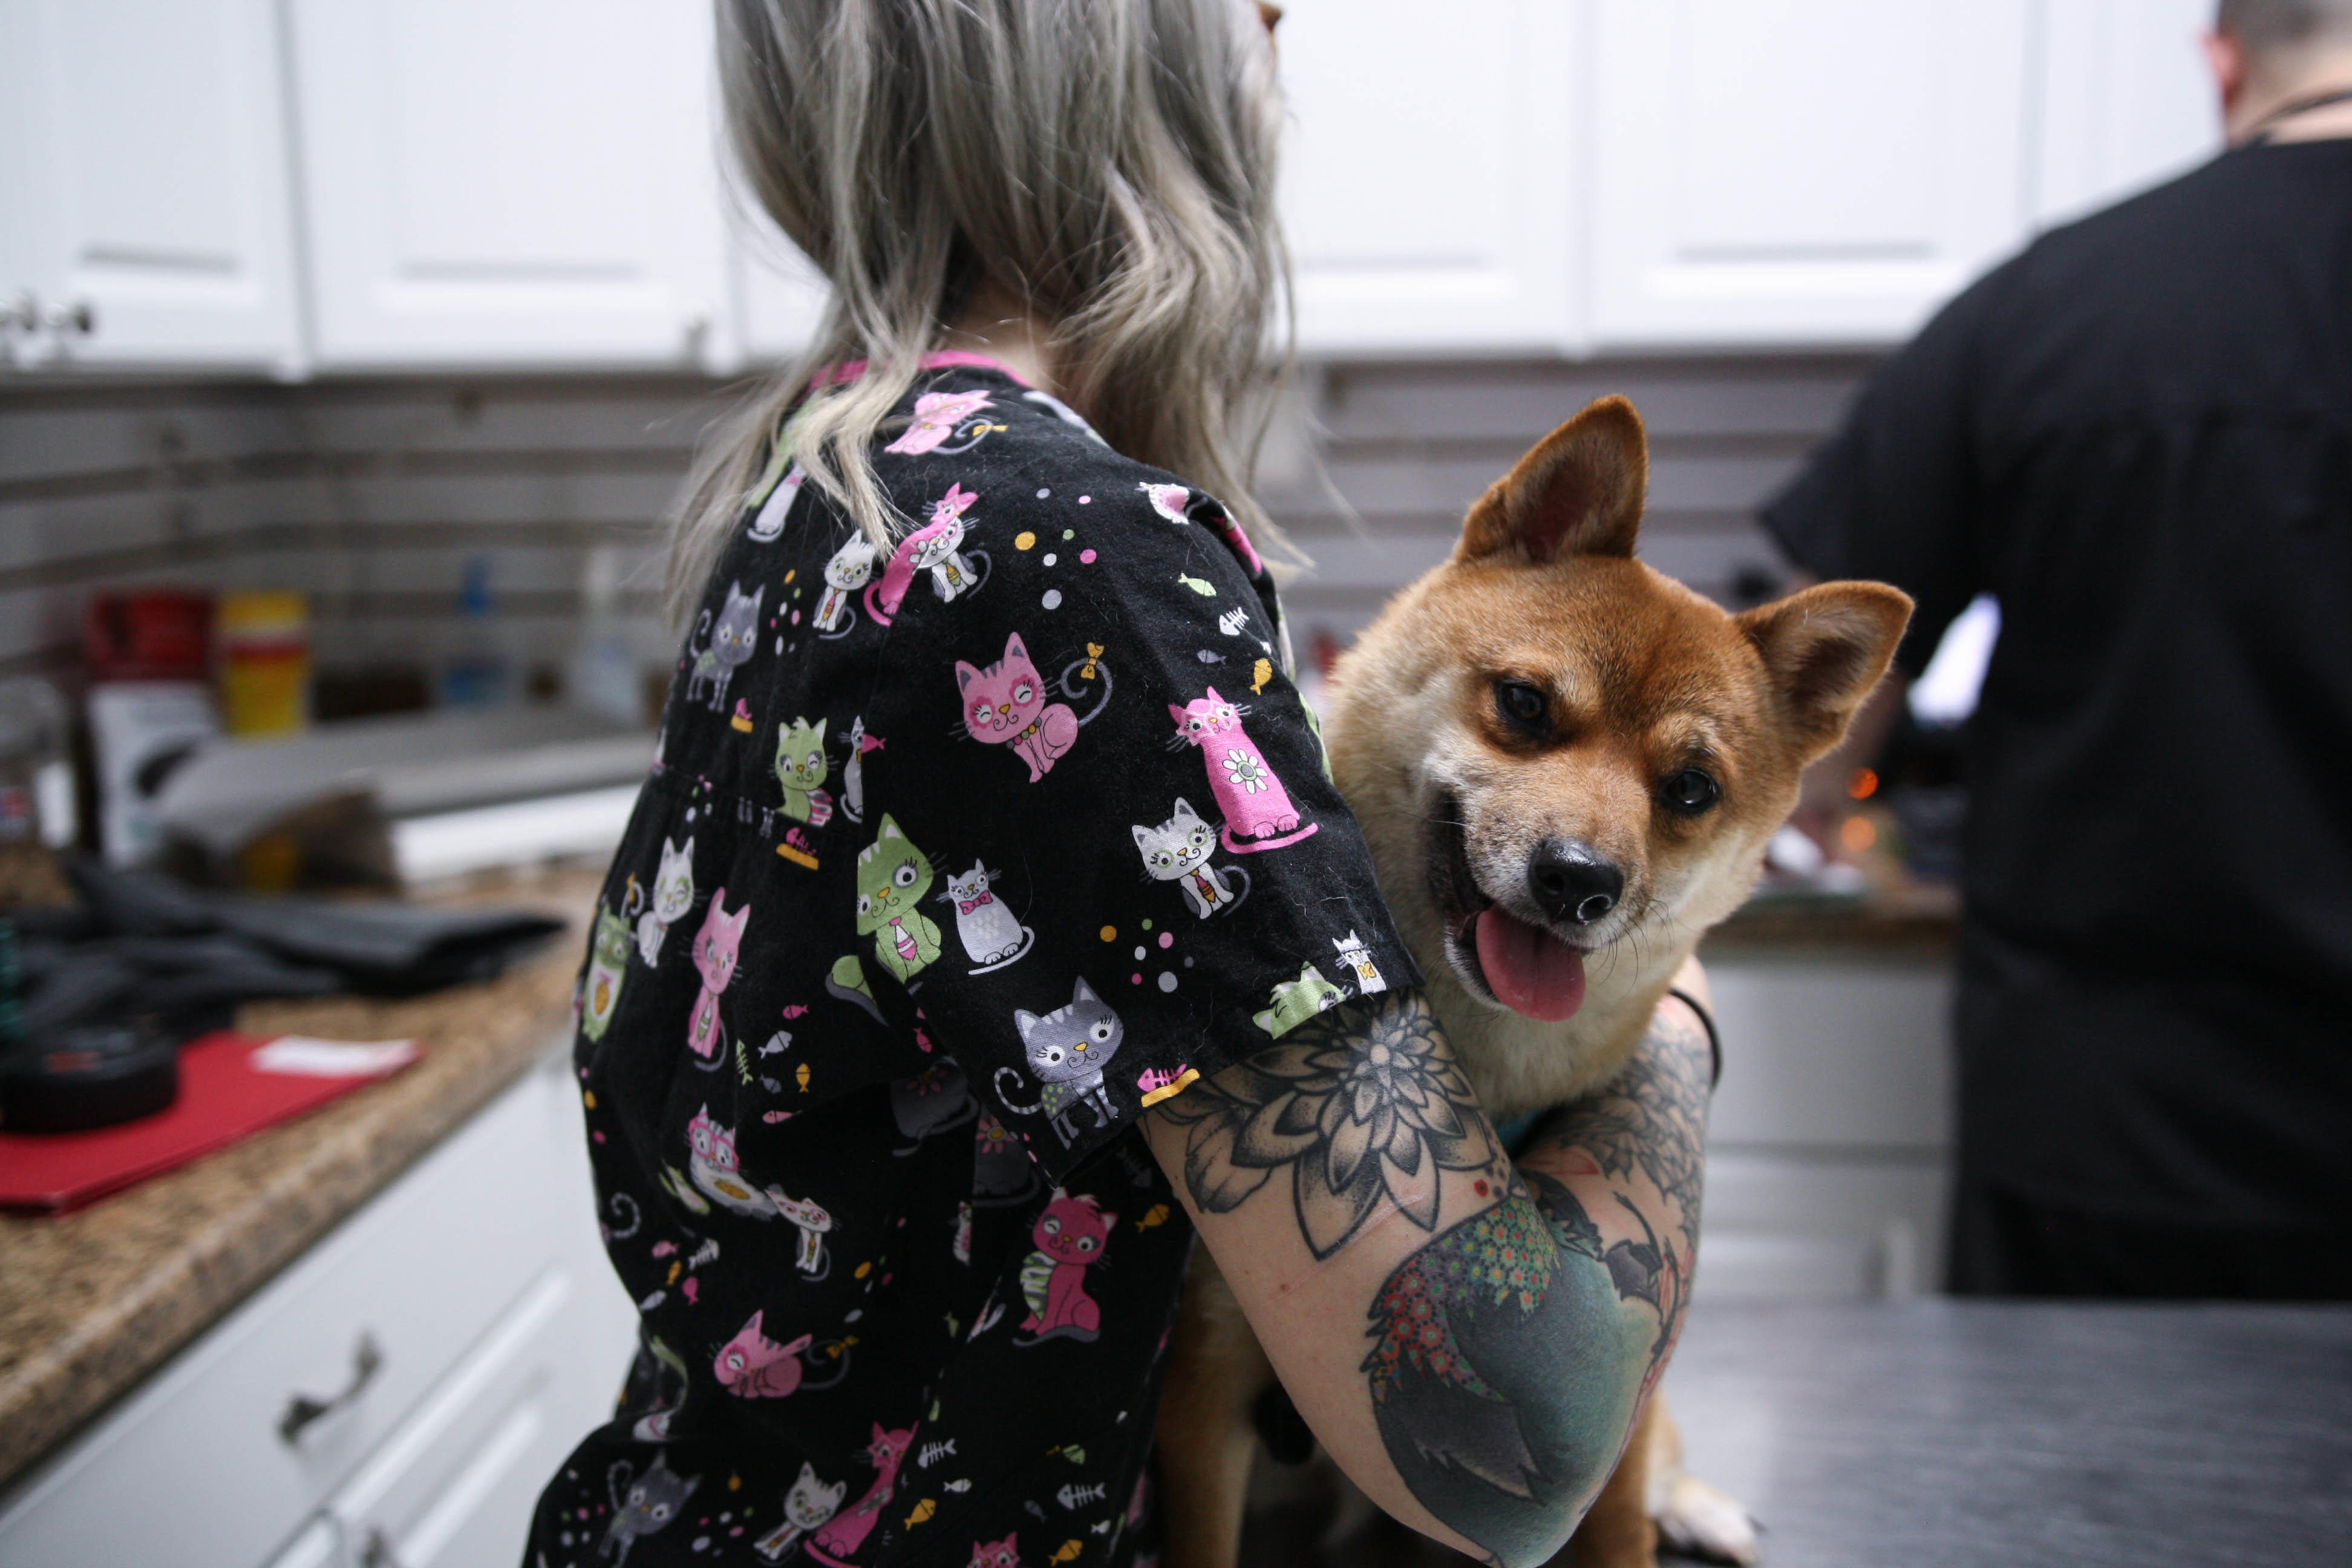 This precious pup warms up to a veterinary technician before Dr. Funk examines him nose-to-tail.